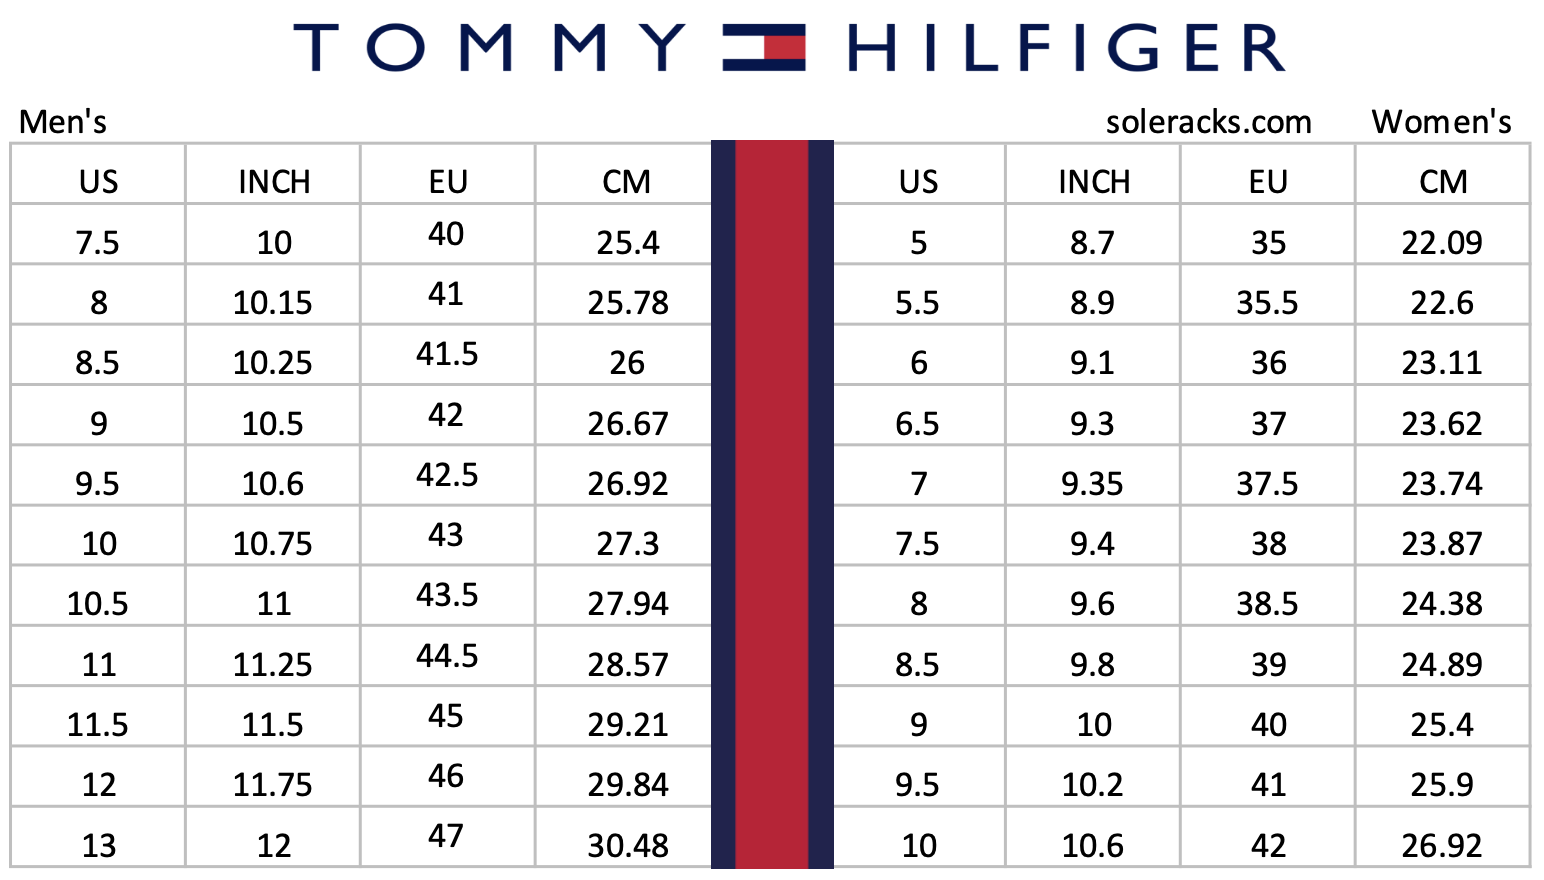 Example of Tommy Hilfiger Size chart converting men into women's sizes